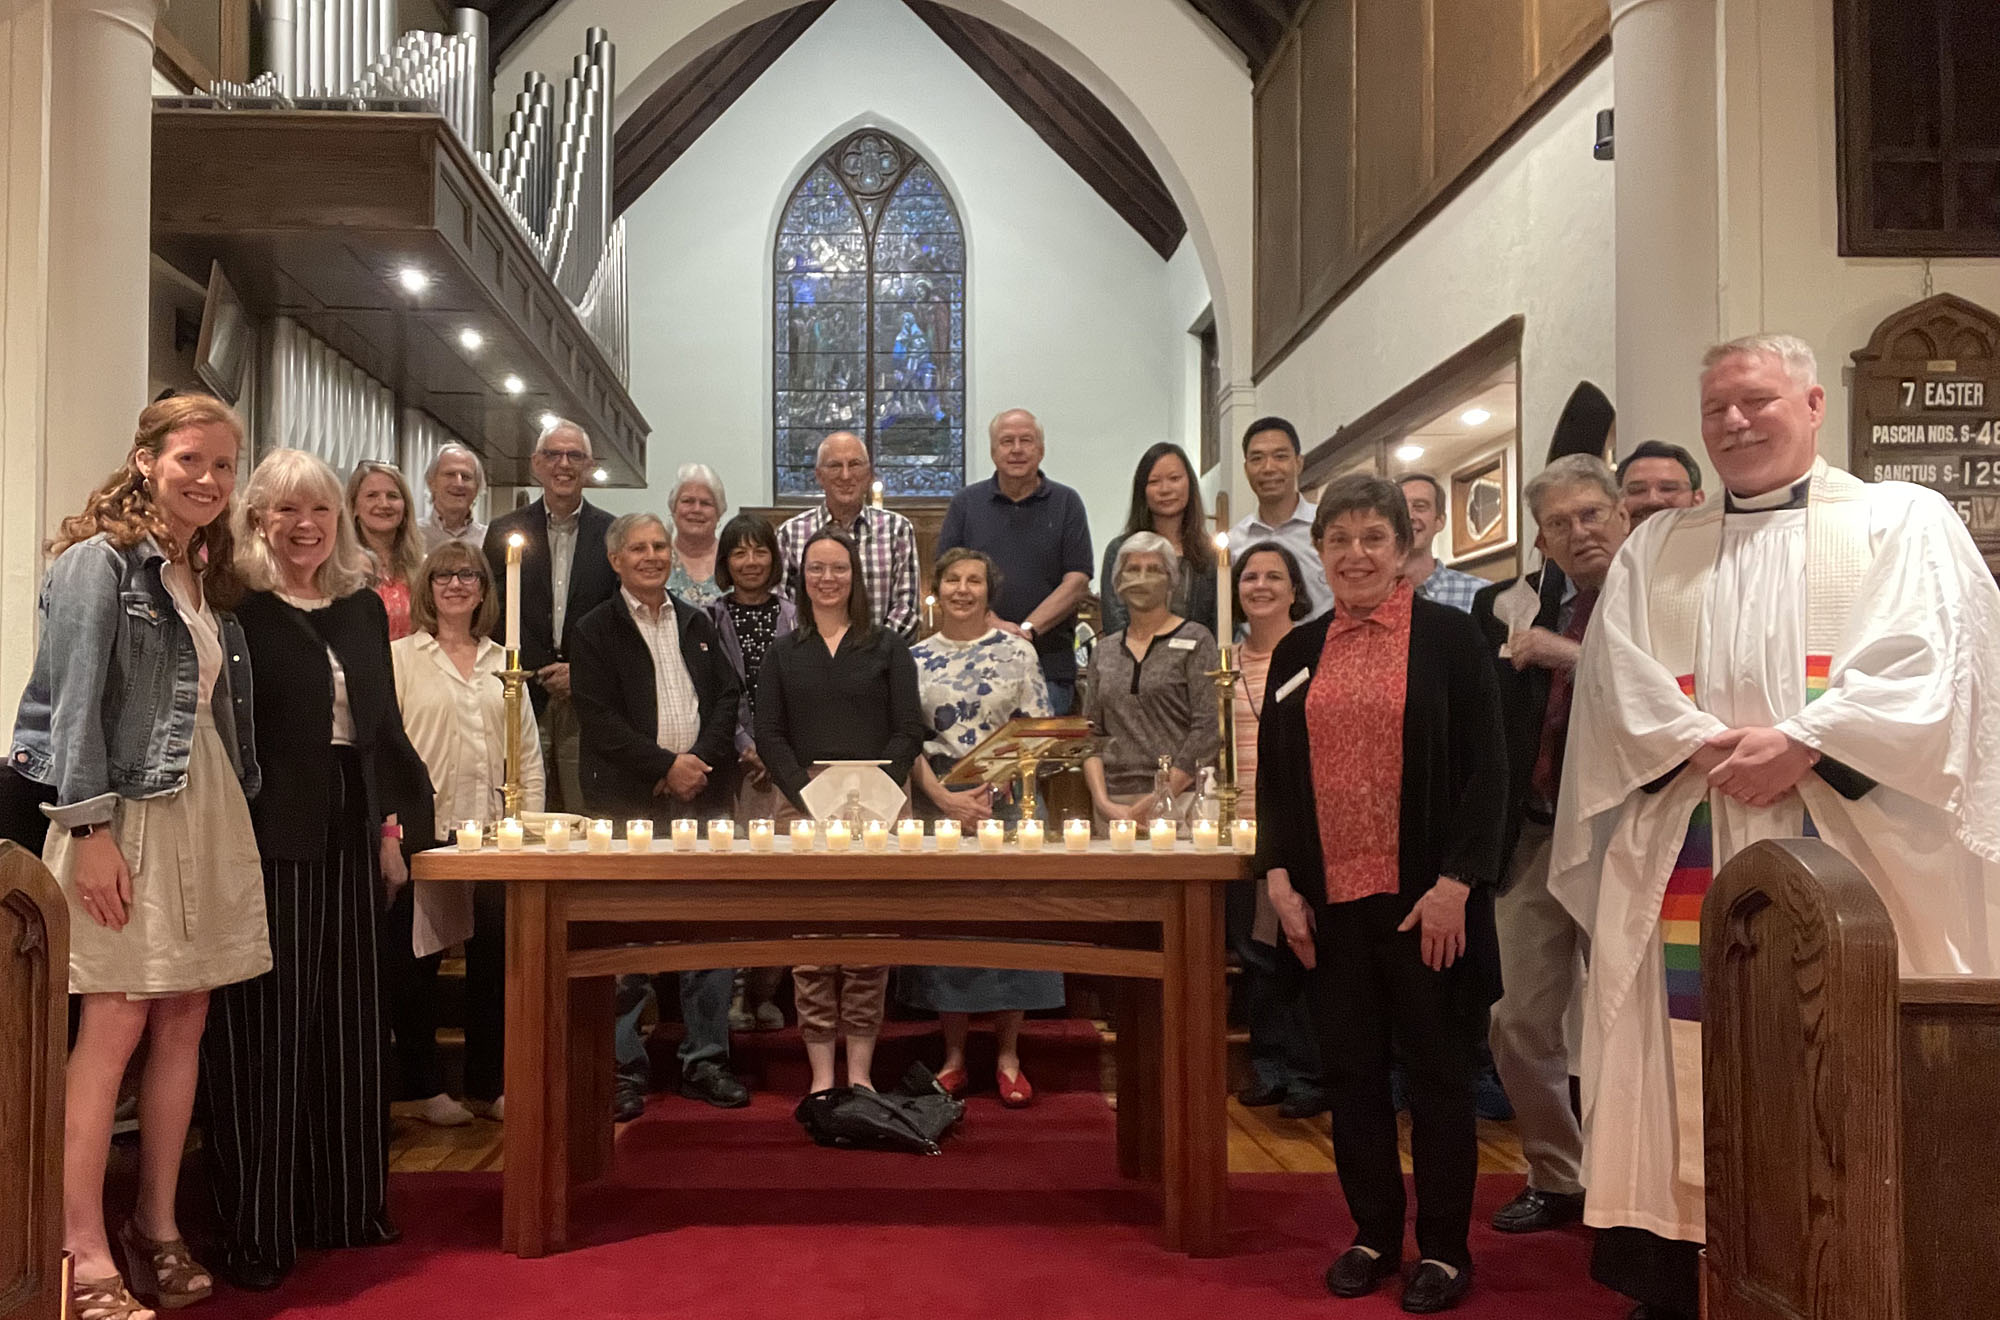 Members of St. Elizabeth’s, Ridgewood; All Saints’, Glen Rock; and Christ Church, Ridgewood celebrate after completing the Sacred Ground series on race.